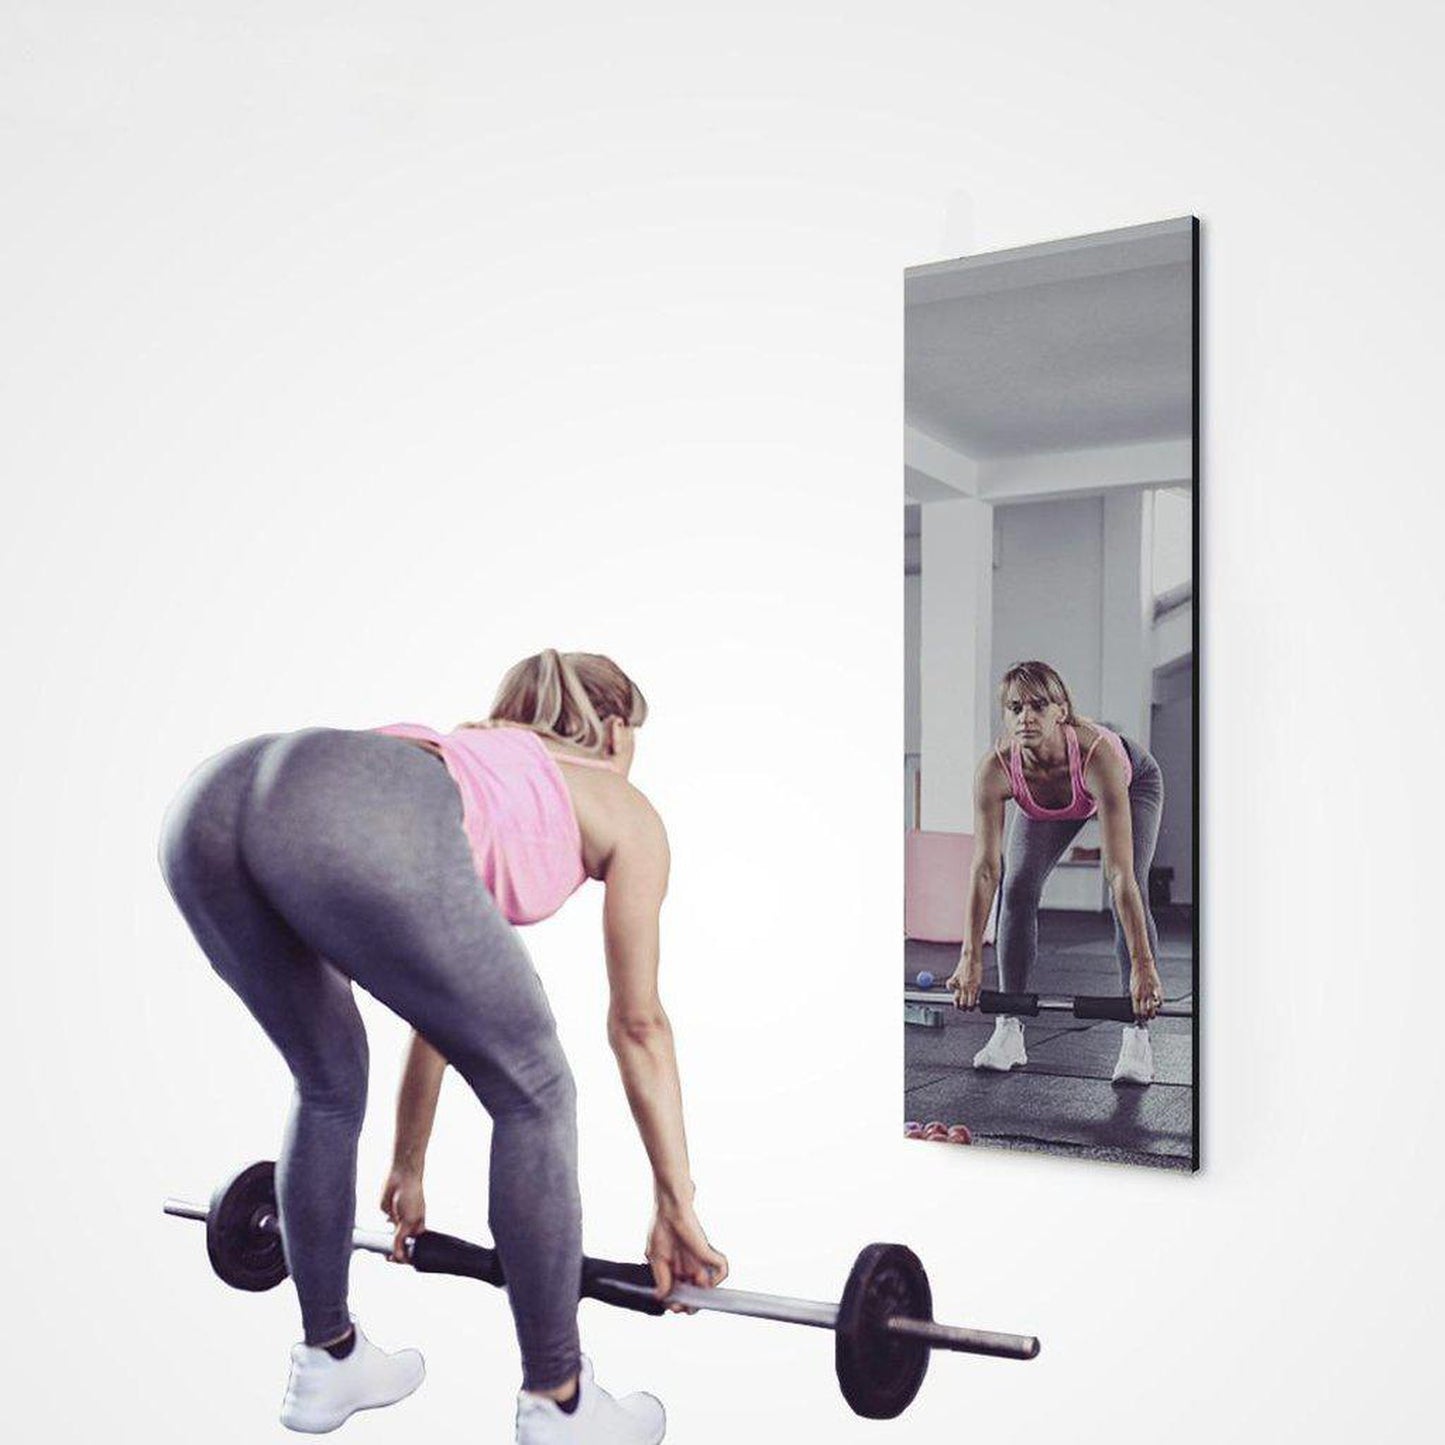 Aquadom Energy 18" X 48" Smart Fitness Mirror With 5MP HD Camera and Body Fat Scale